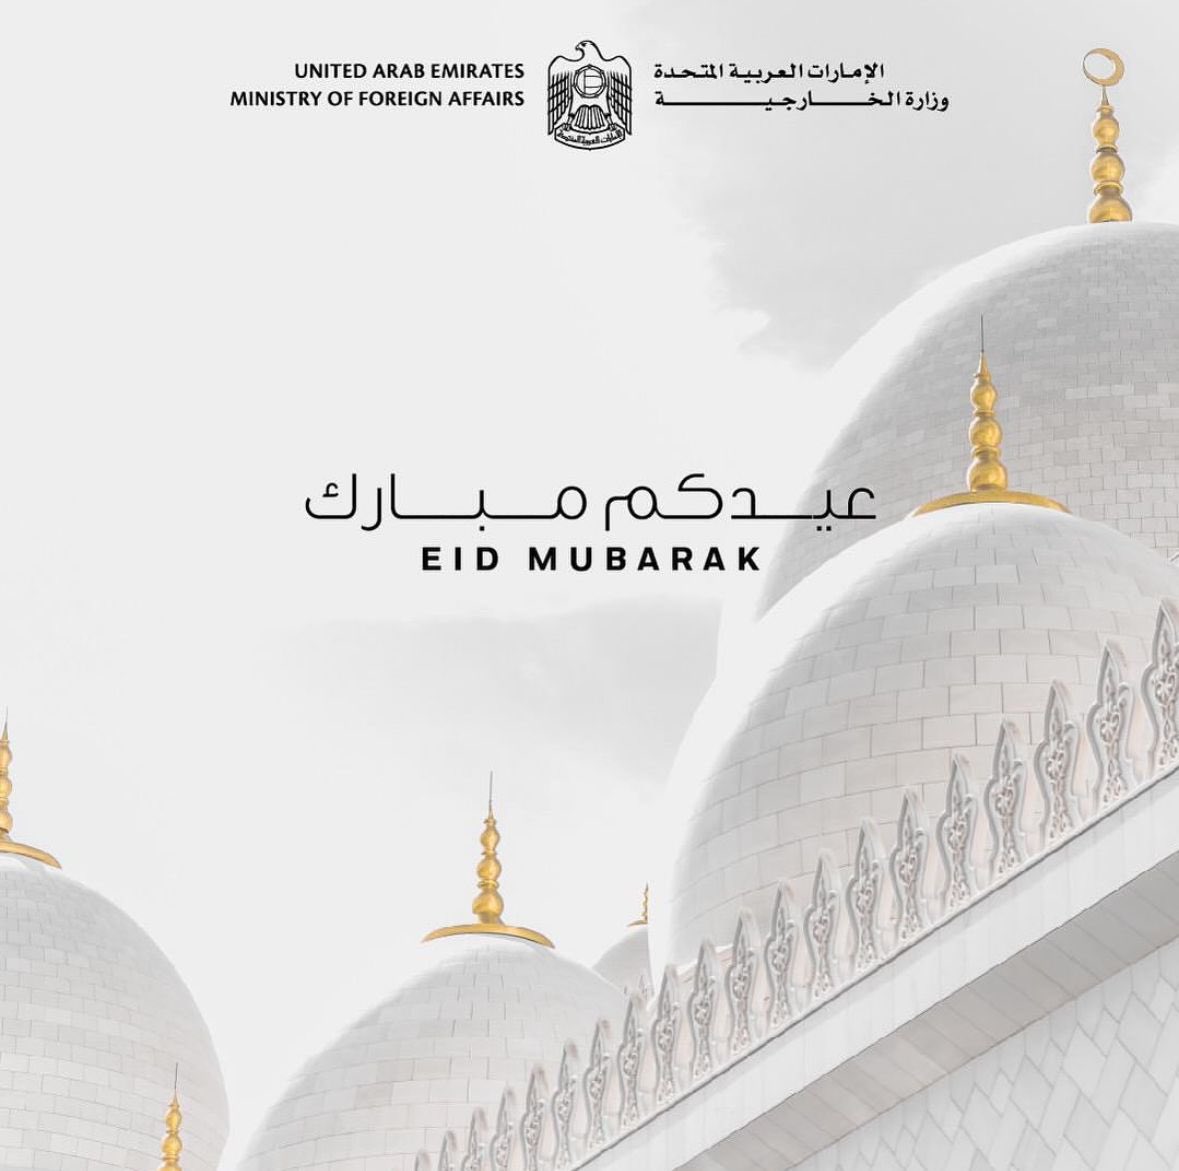 UAE Embassy in Islamabad extends its heartiest felicitations and congratulations to the leadership and peoples of United Arab Emirates and Islamic republic of Pakistan on the occasion of Eid ul Fitr